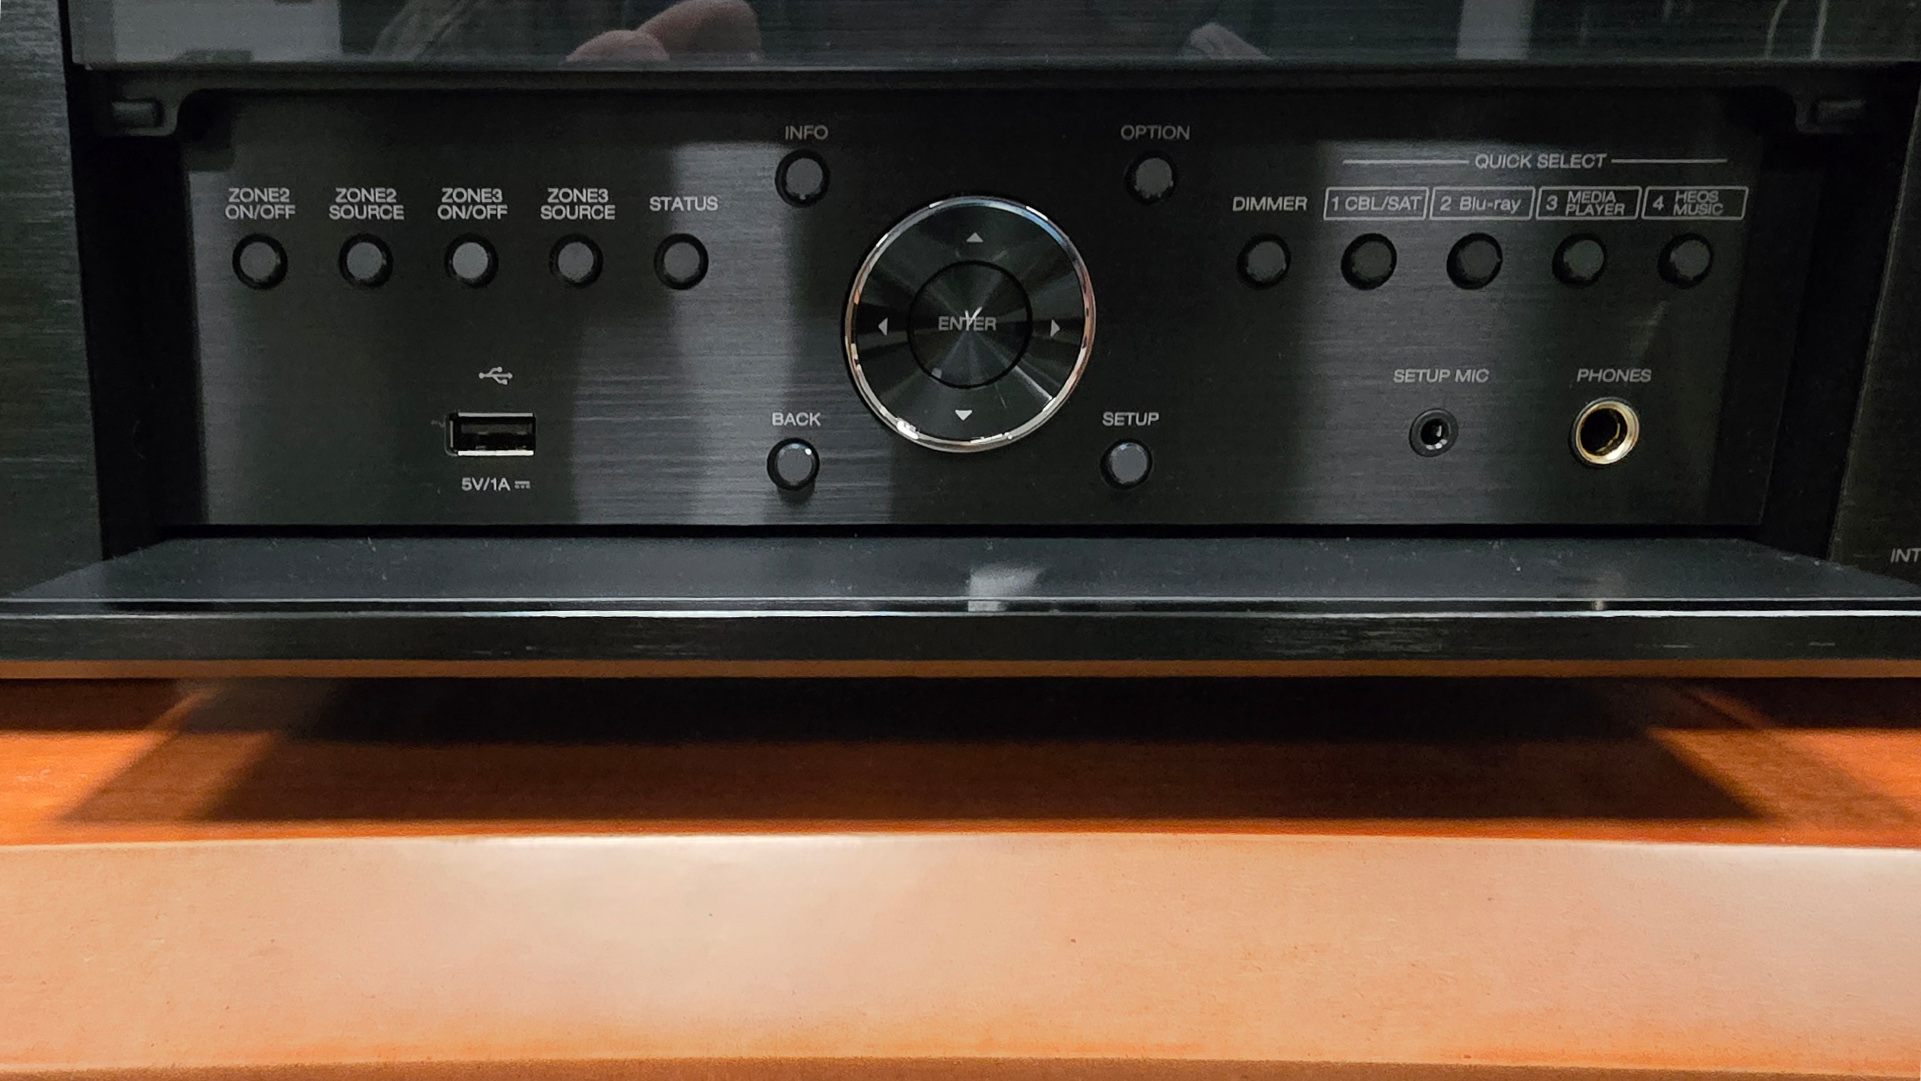 5 crucial tips and tricks to help you get the most out of your Denon AVR